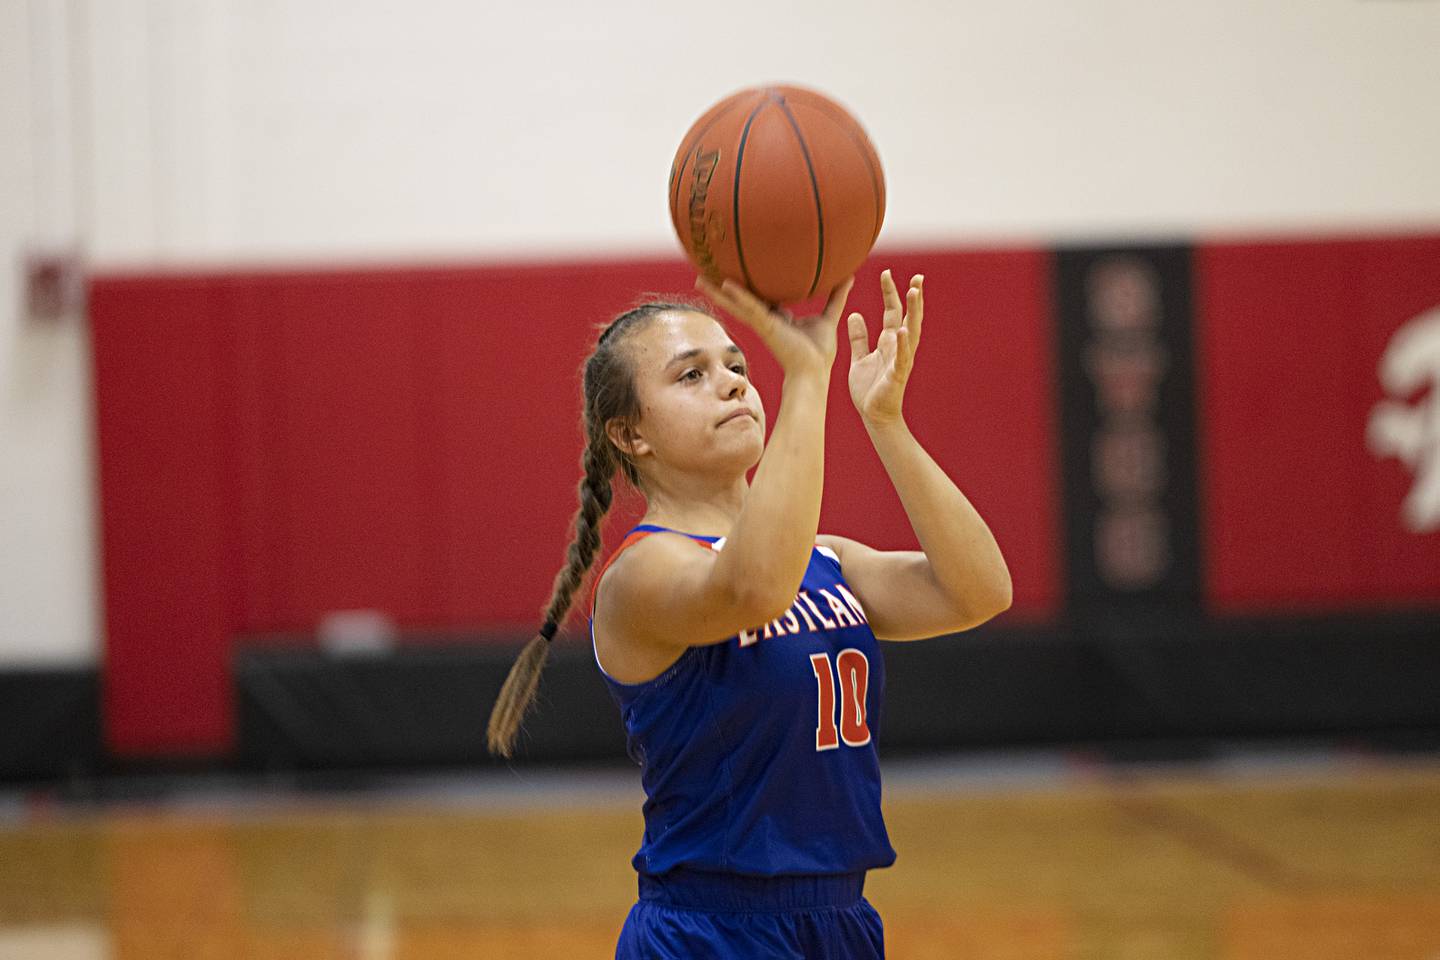 Eastland’s Paige Joiner puts up a shot in the three point contest Thursday, June 15, 2023 during the Sauk Valley Media All-Star Basketball Classic at Sauk Valley College.